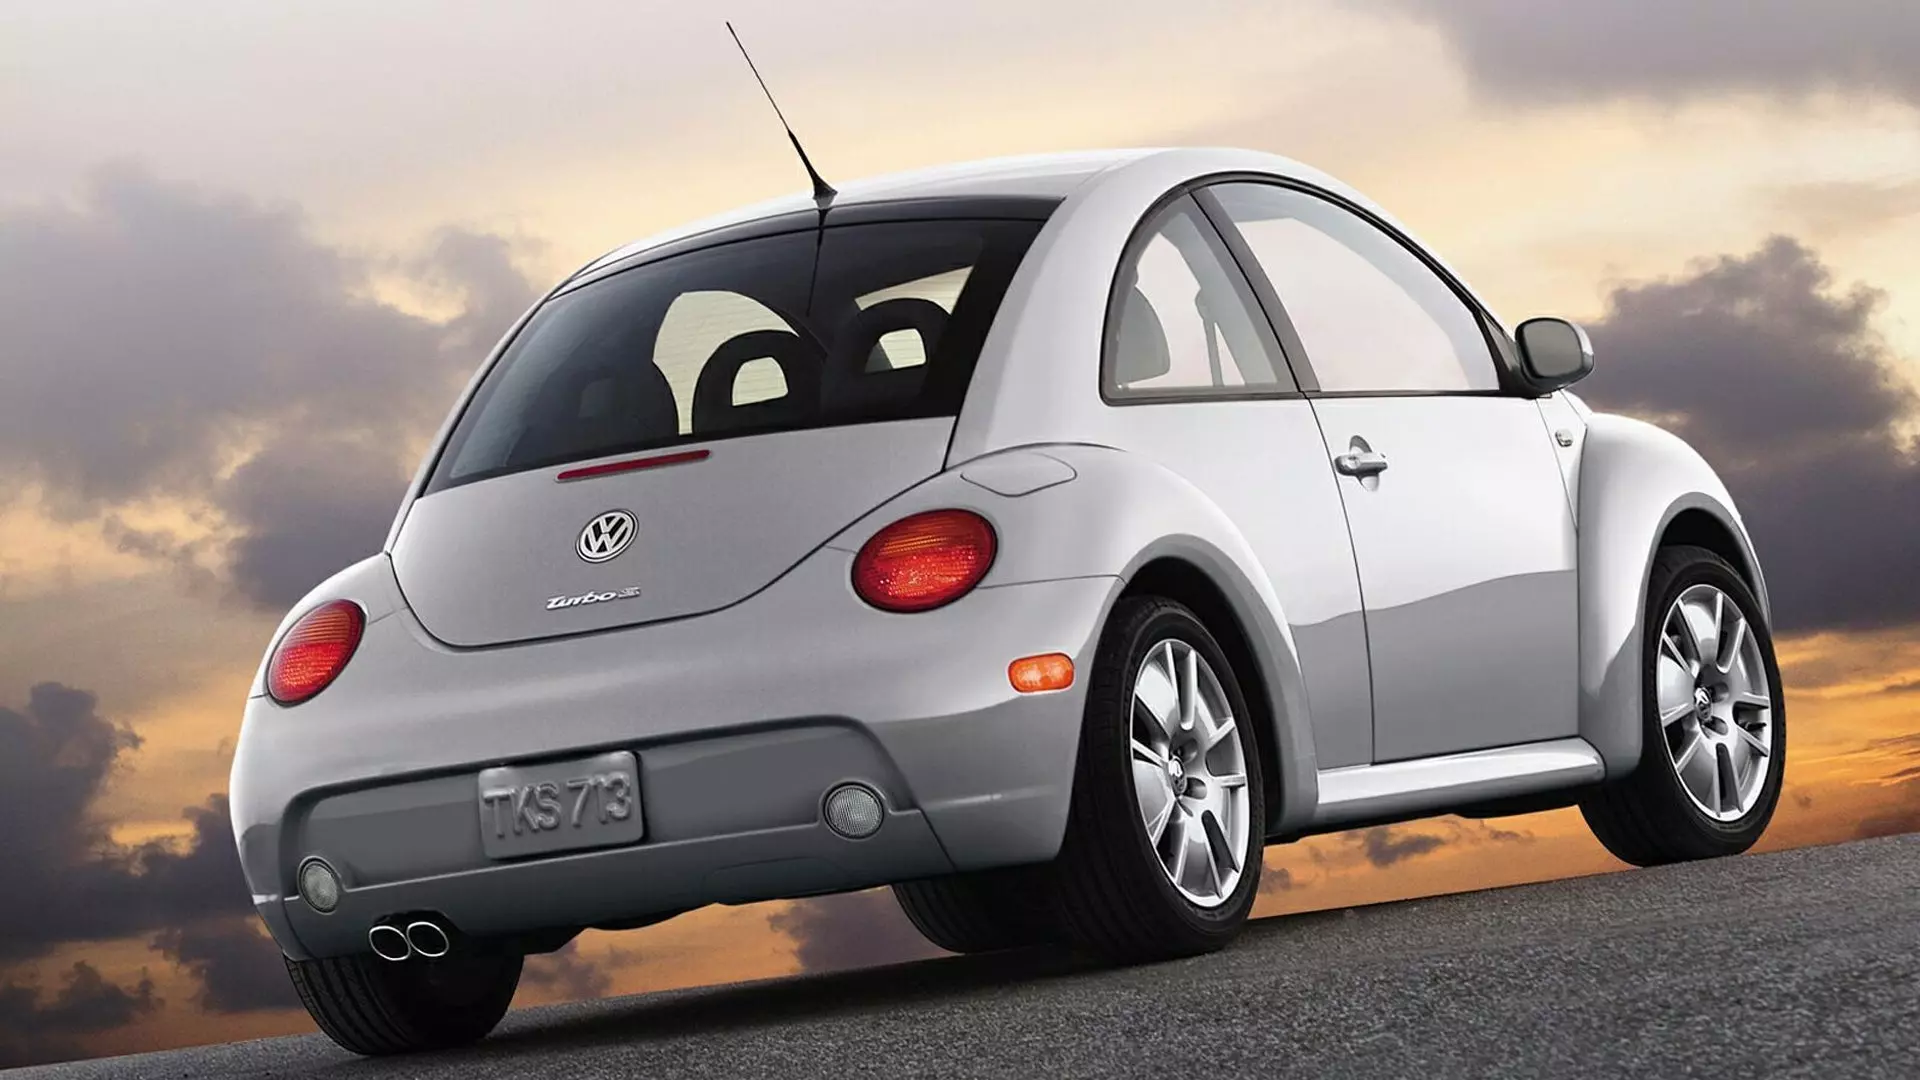 GTI Performance, Adorable Looks: The Volkswagen Beetle Turbo S Was a Real Thing | Autance